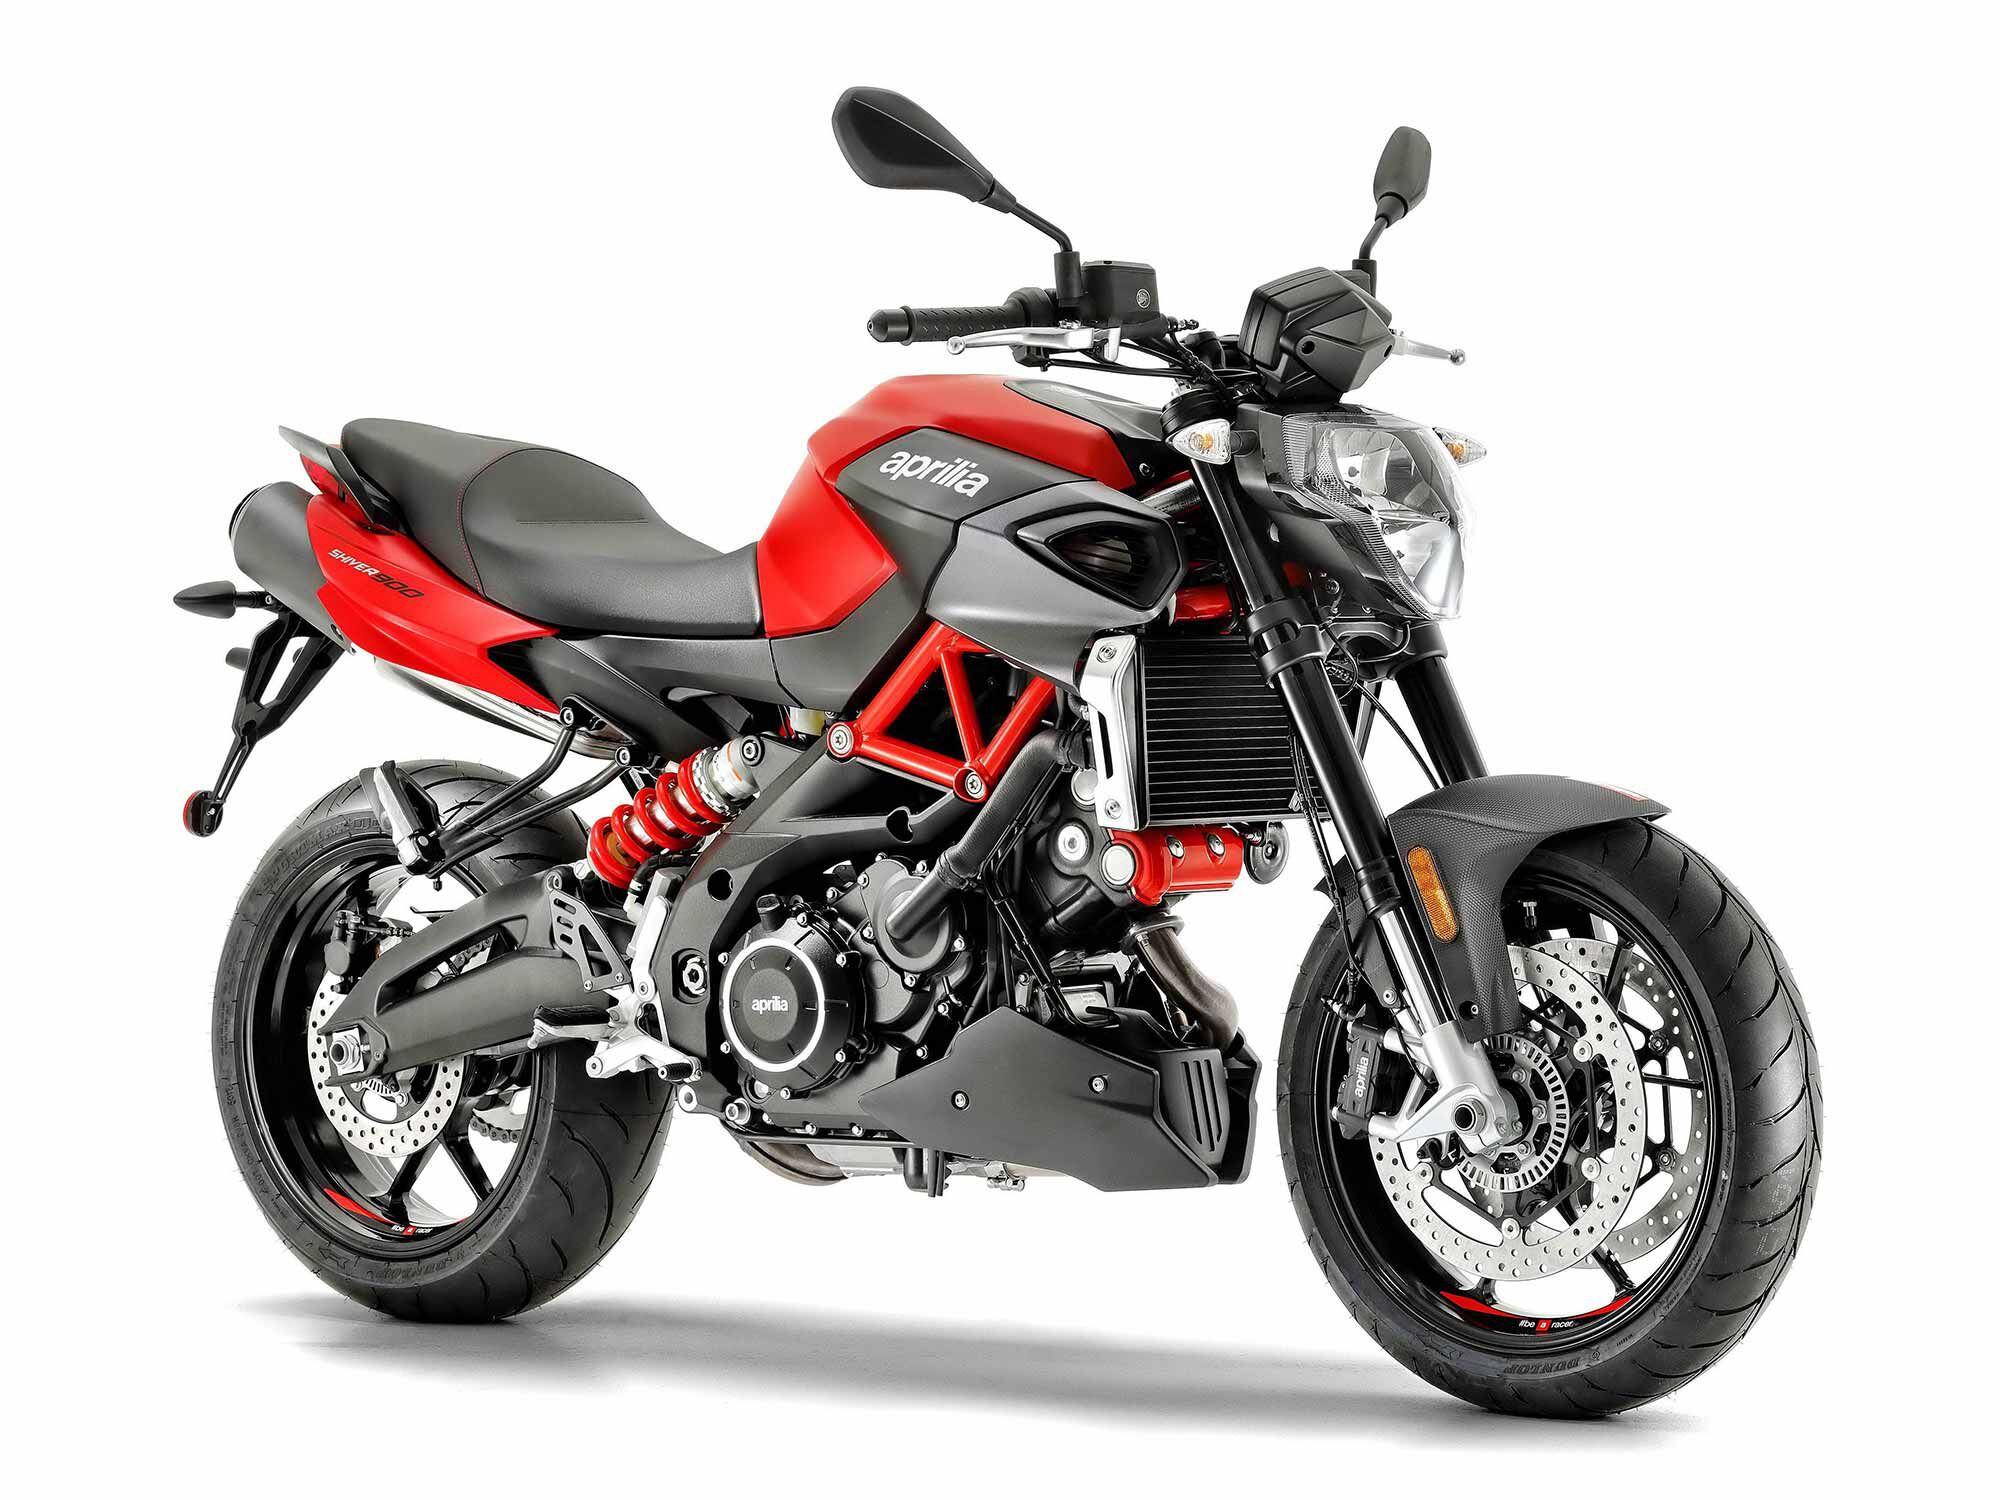 Aprilia’s Shiver 900, which was dropped back in 2020, seems to have grabbed a new lease on life as a Gilera.